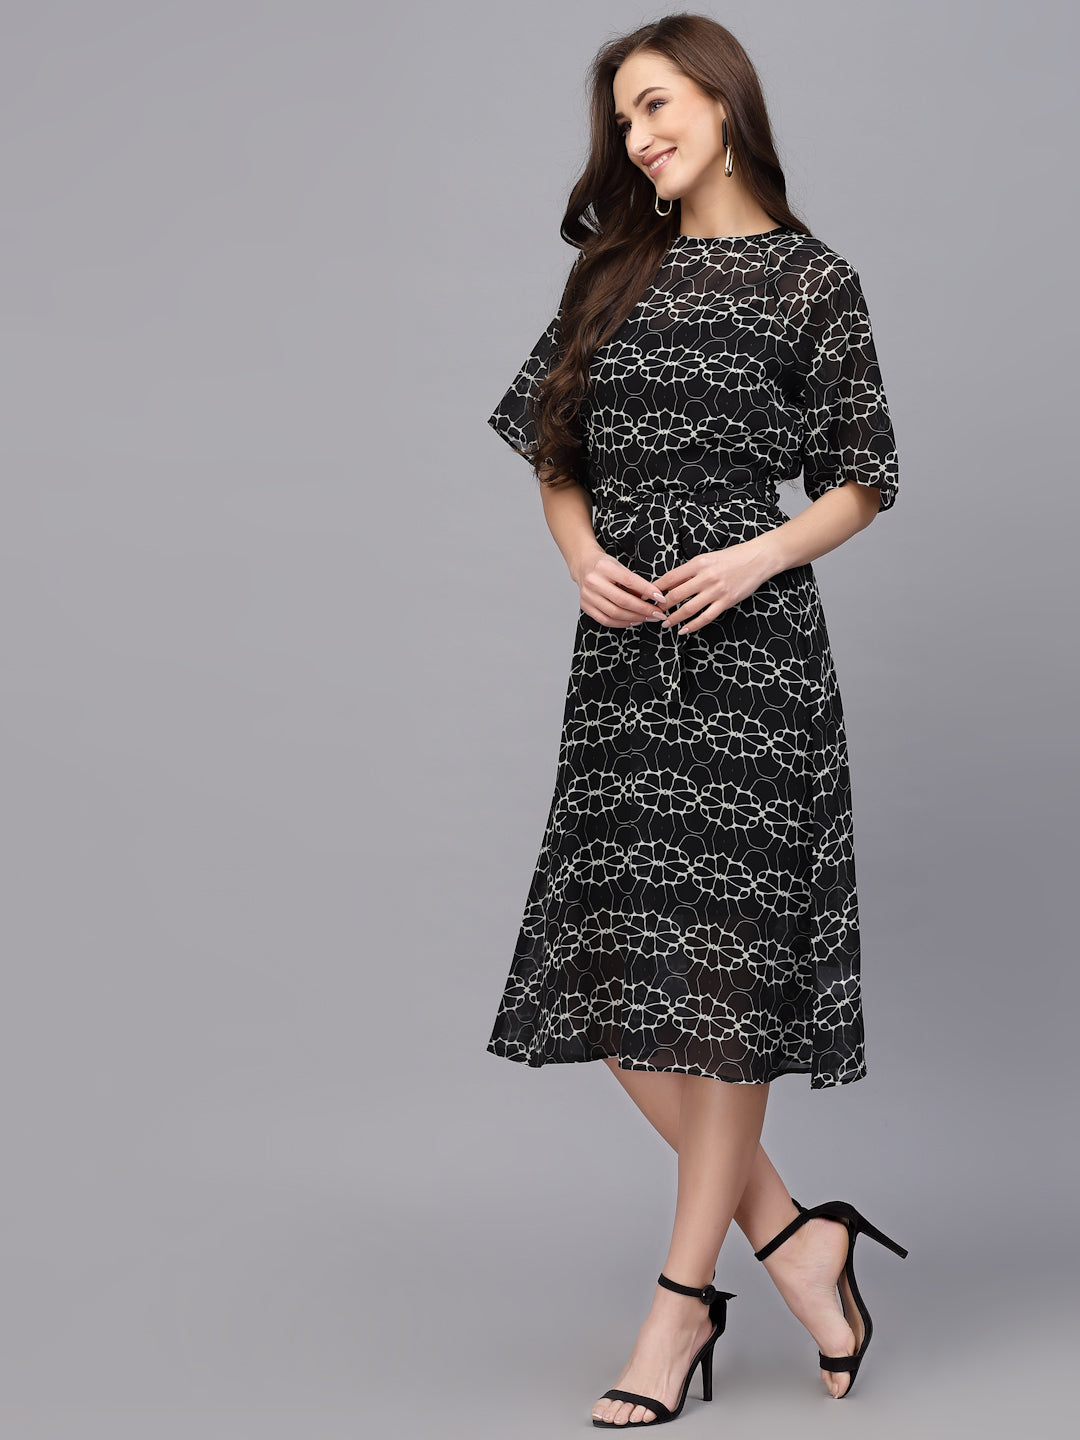 Fancy Black One Piece Dress at Rs.999/Piece in gandhinagar offer by KRUPA  Group